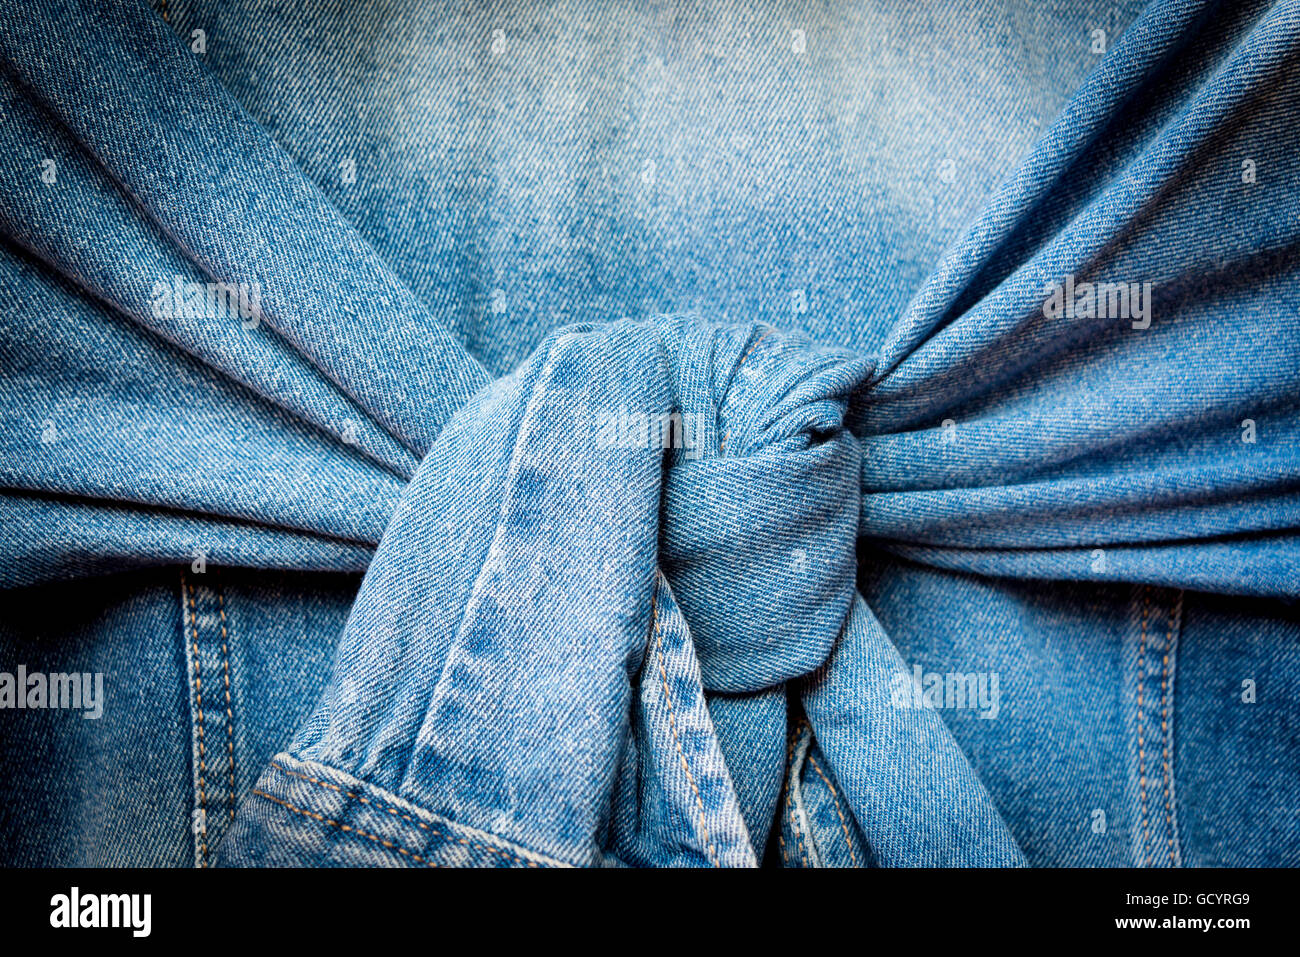 Blue denim jacket with knot tied sleeves Stock Photo